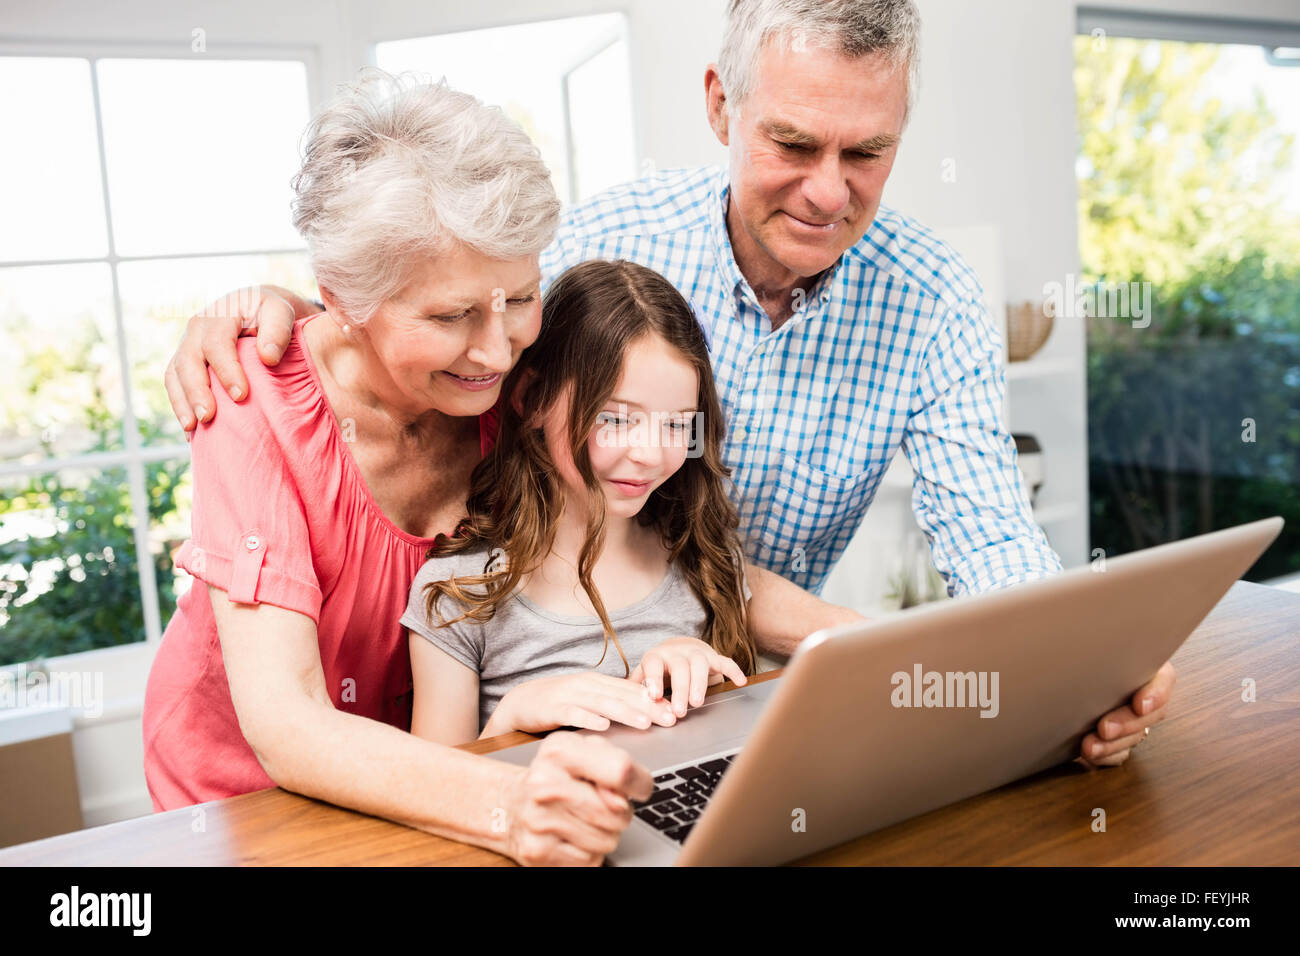 Portrait of smiling grandparents and granddaughter using laptop Stock Photo